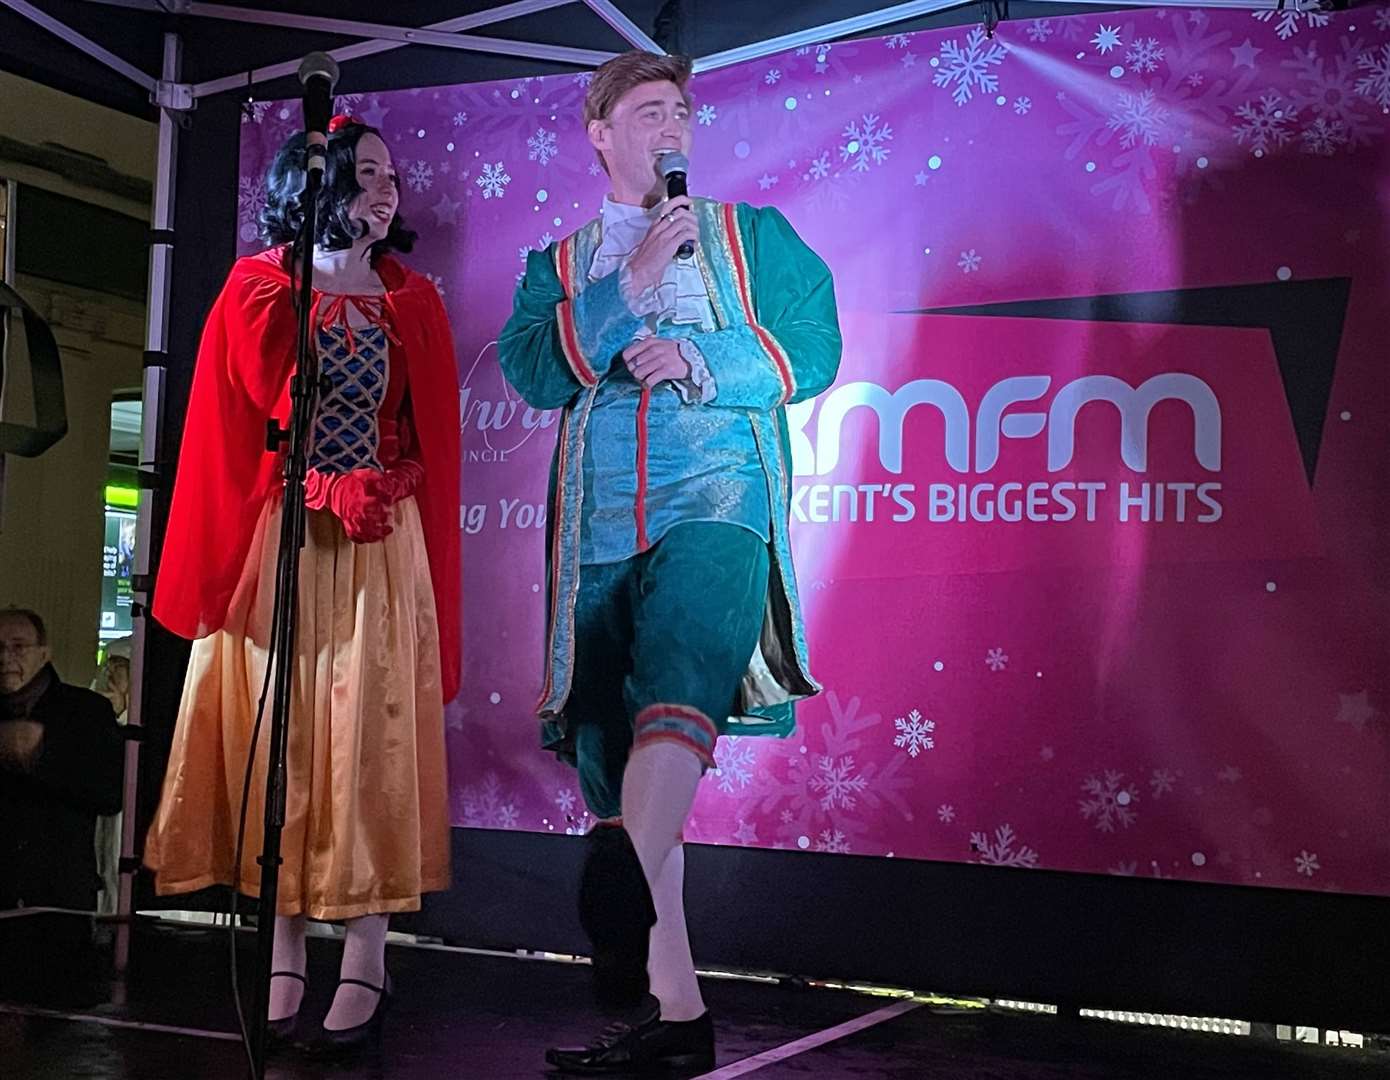 KMFM were at the Christmas lights turn on in Chatham